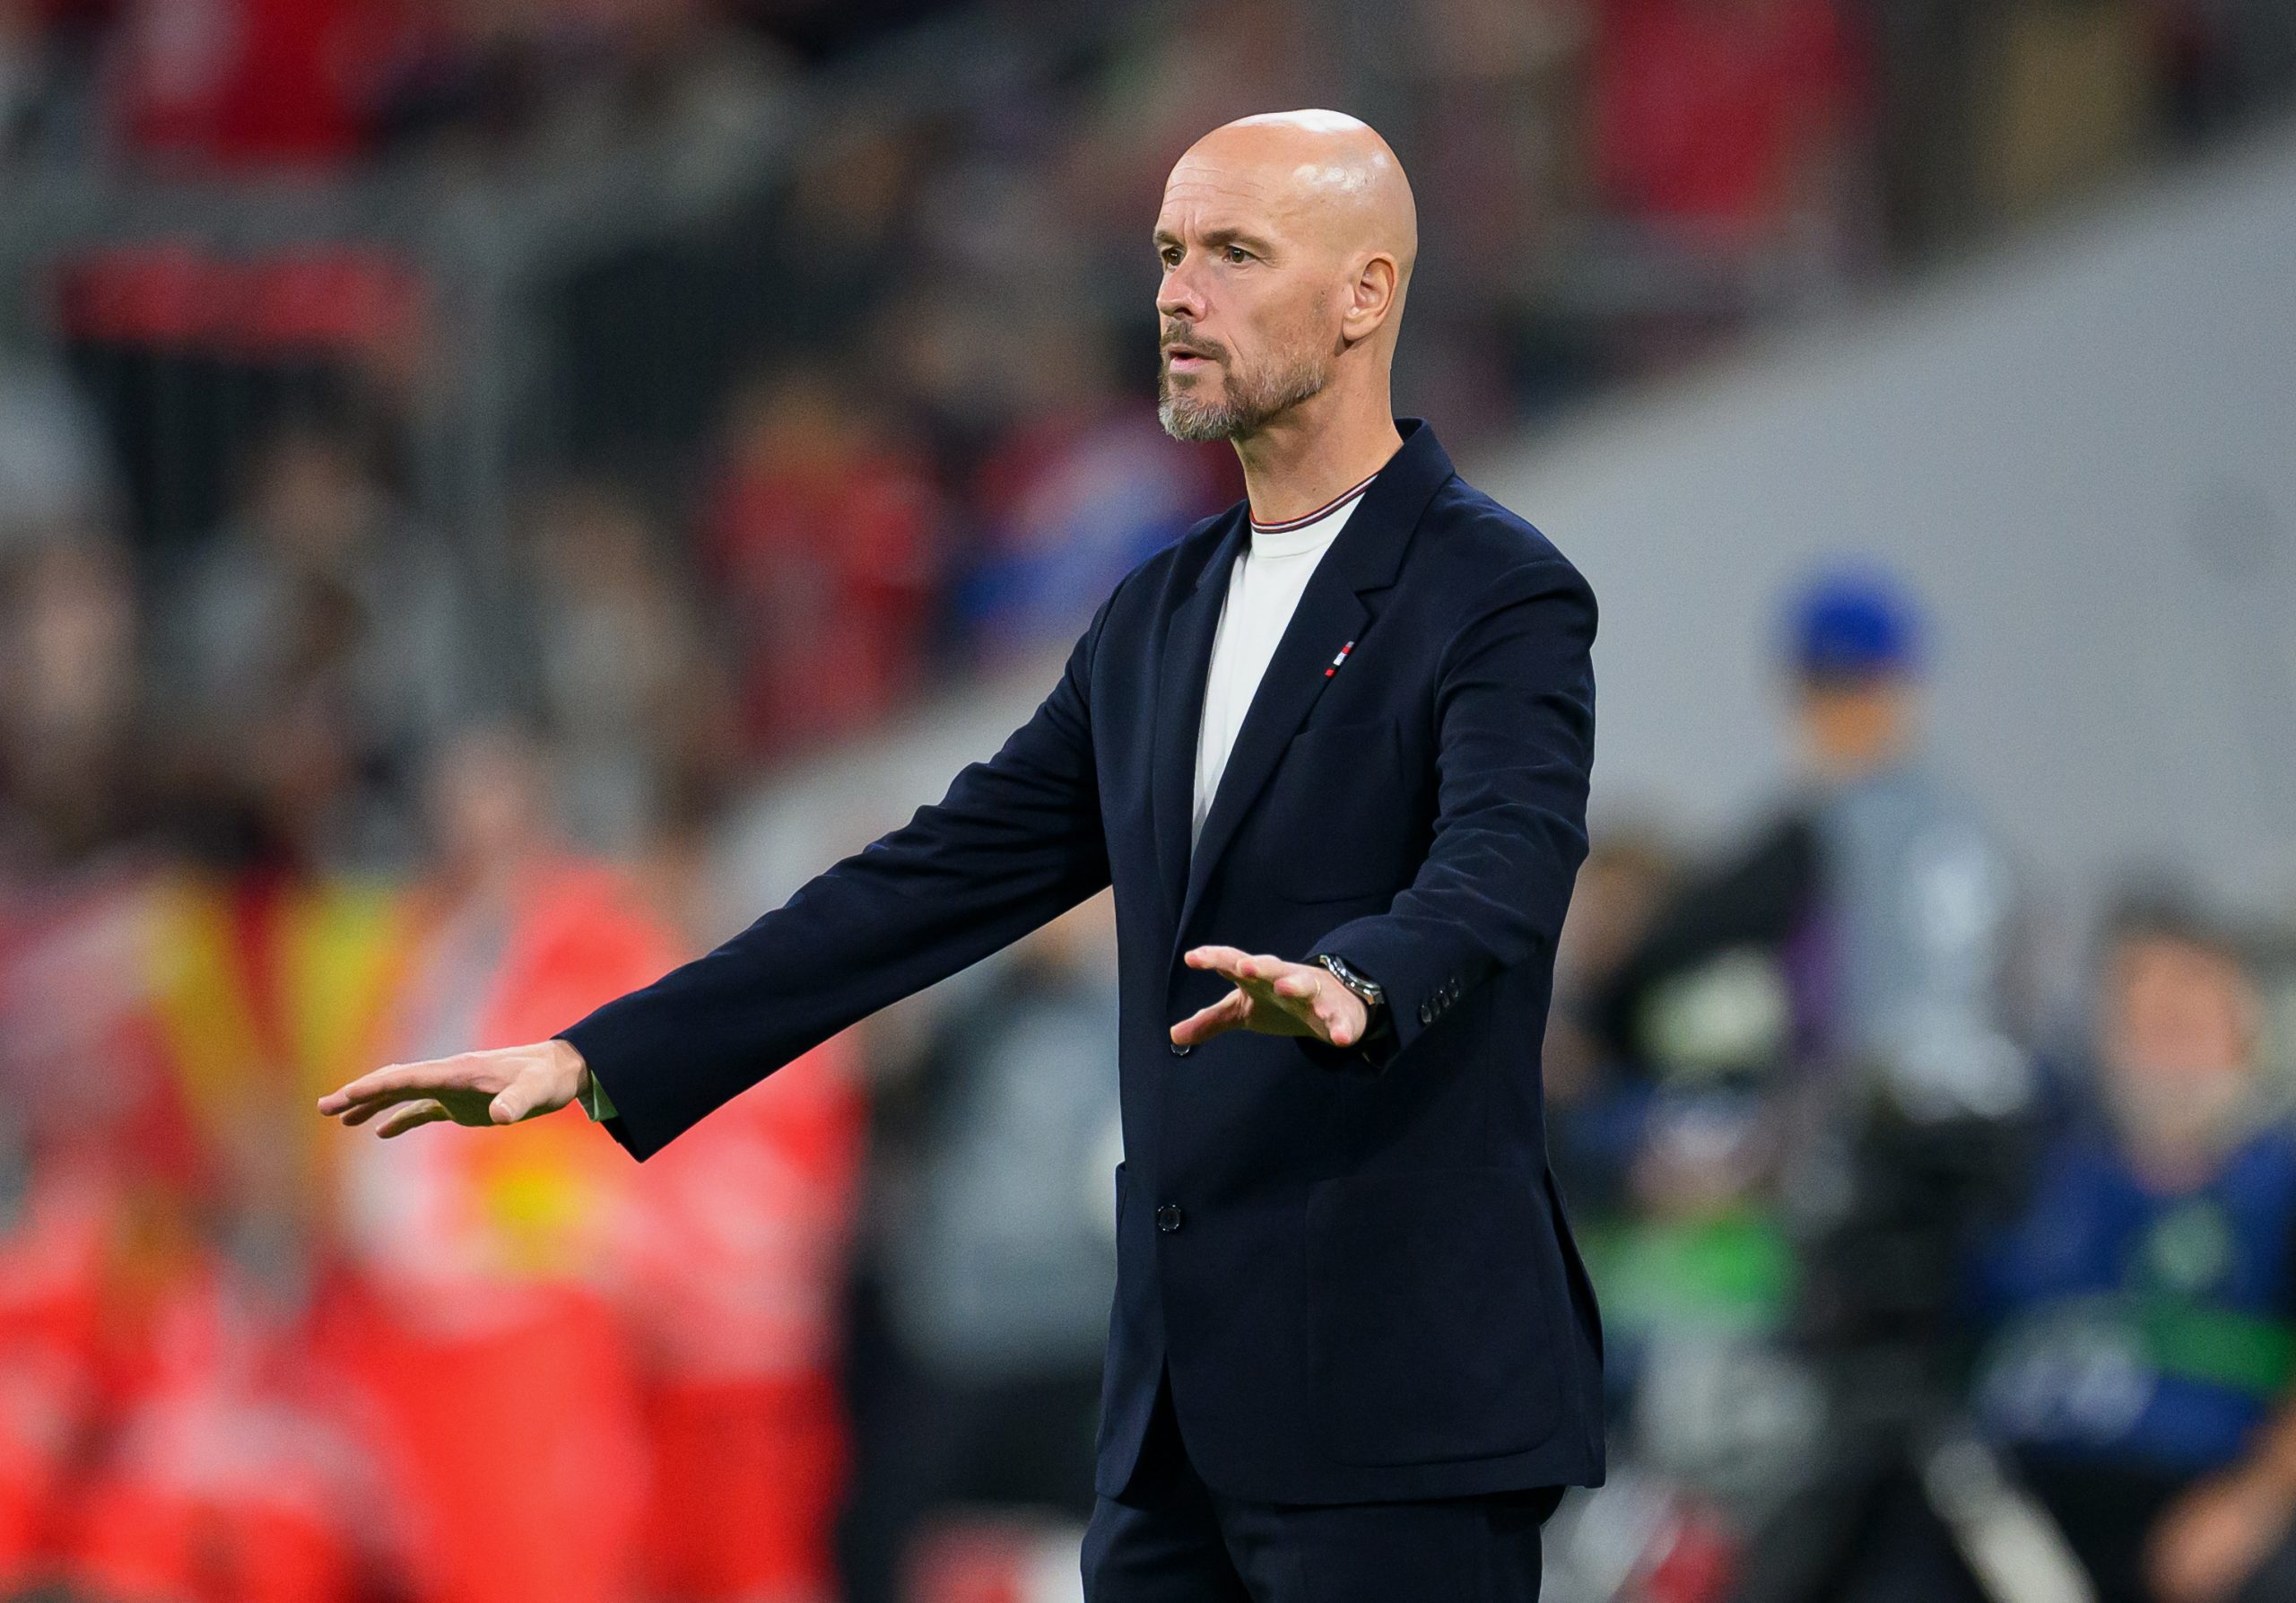 MUNICH, GERMANY - SEPTEMBER 20: Head coach Erik ten Hag of Manchester United gestures during the UEFA Champions League match between FC Bayern München and Manchester United at Allianz Arena on September 20, 2023 in Munich, Germany. (Photo by Matthias Hangst/Getty Images)